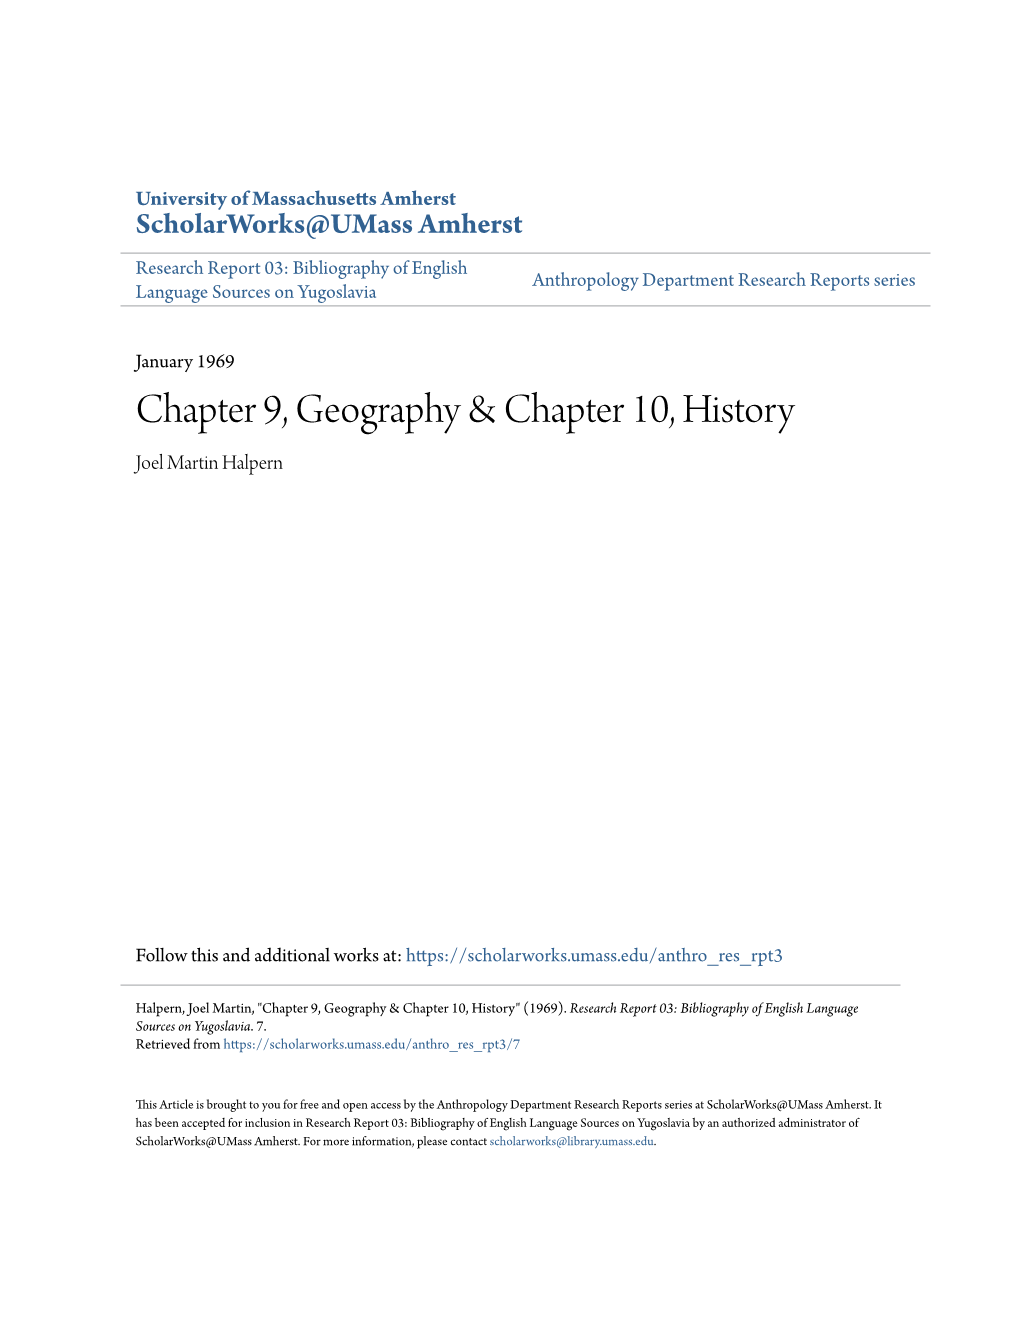 Chapter 9, Geography & Chapter 10, History